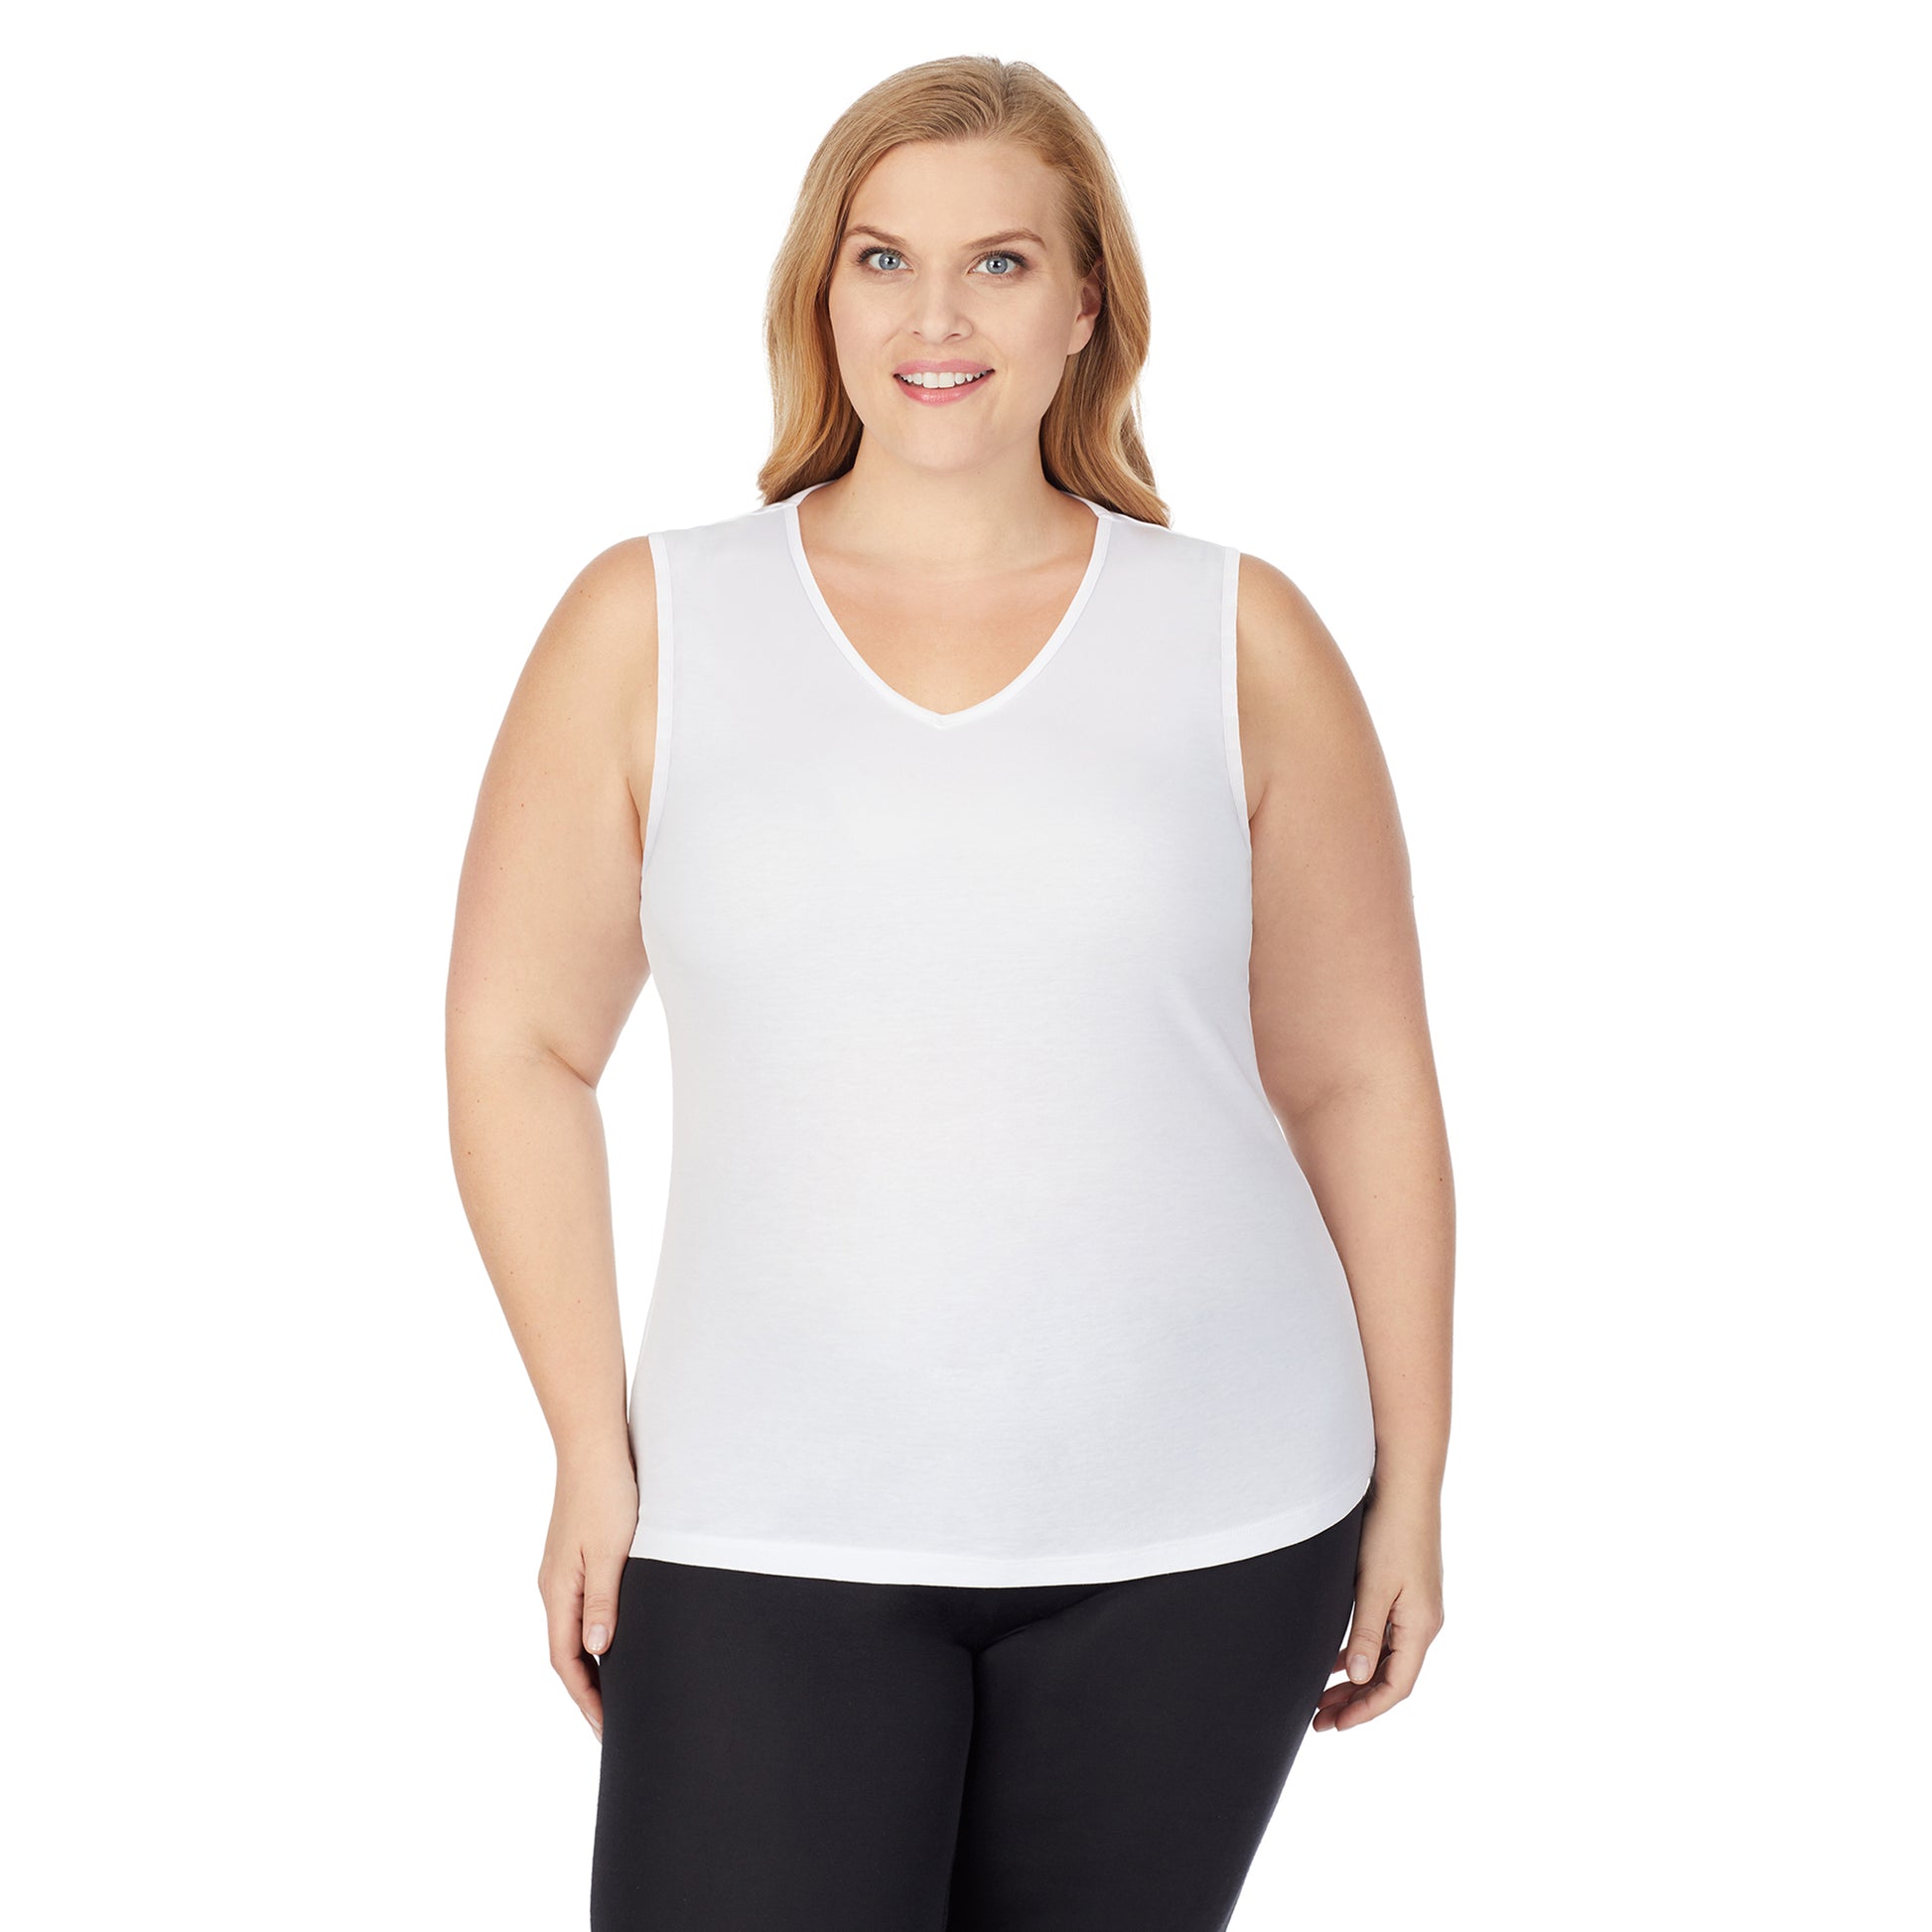 White; Model is wearing size 1X. She is 5'9", Bust 38", Waist 36", Hips 48.5".@upper body of A lady wearing white v-neck tank top